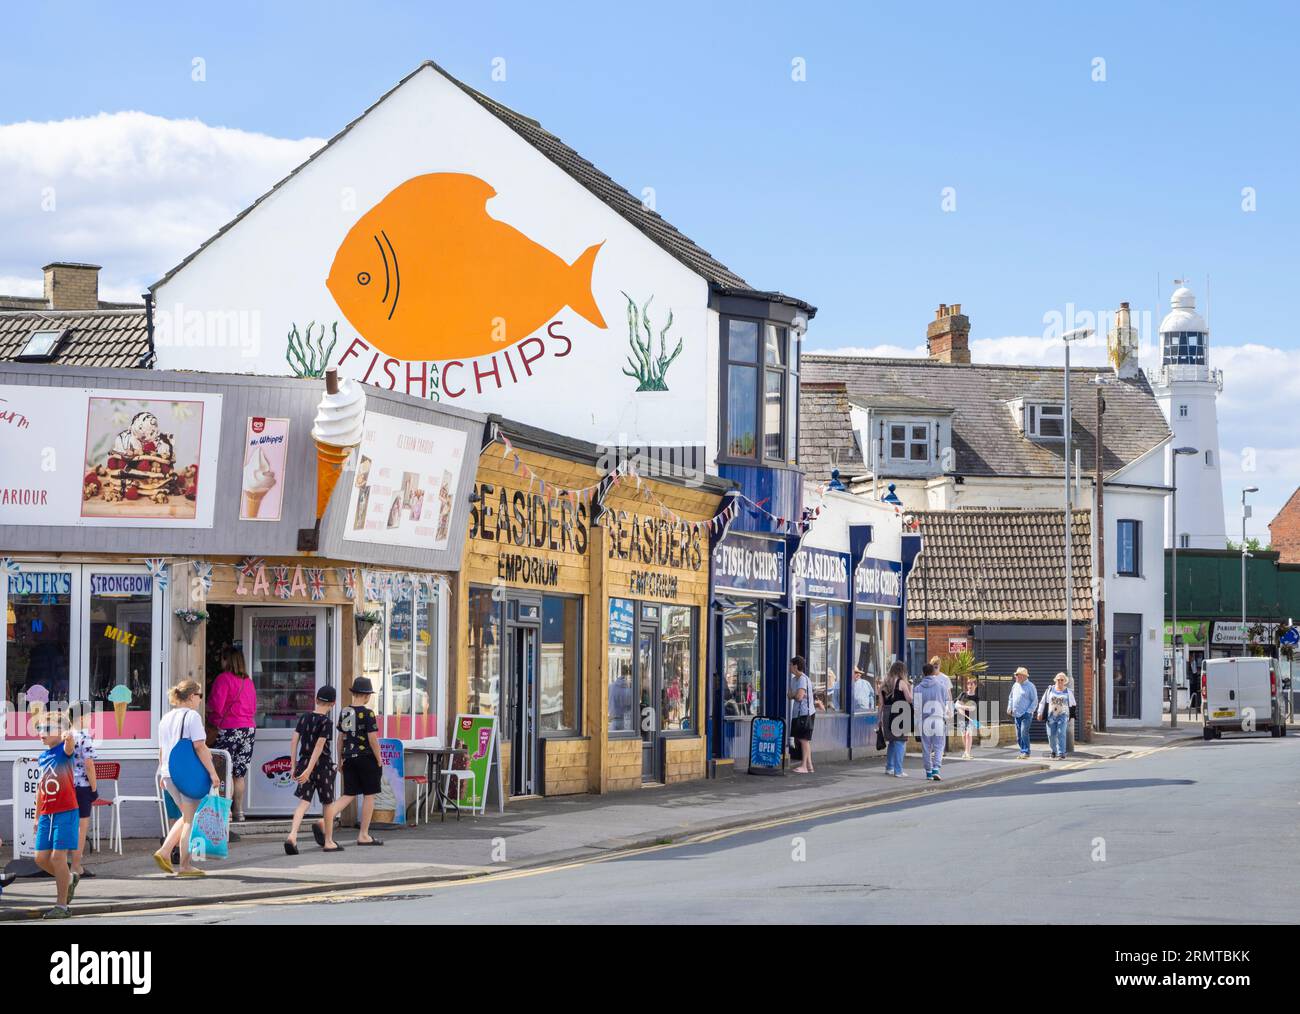 Withernsea Yorkshire Seasiders Fish and Chip Shop and Takeaway Seaside Road Withernsea East Riding of Yorkshire Inghilterra Regno Unito Europa Foto Stock